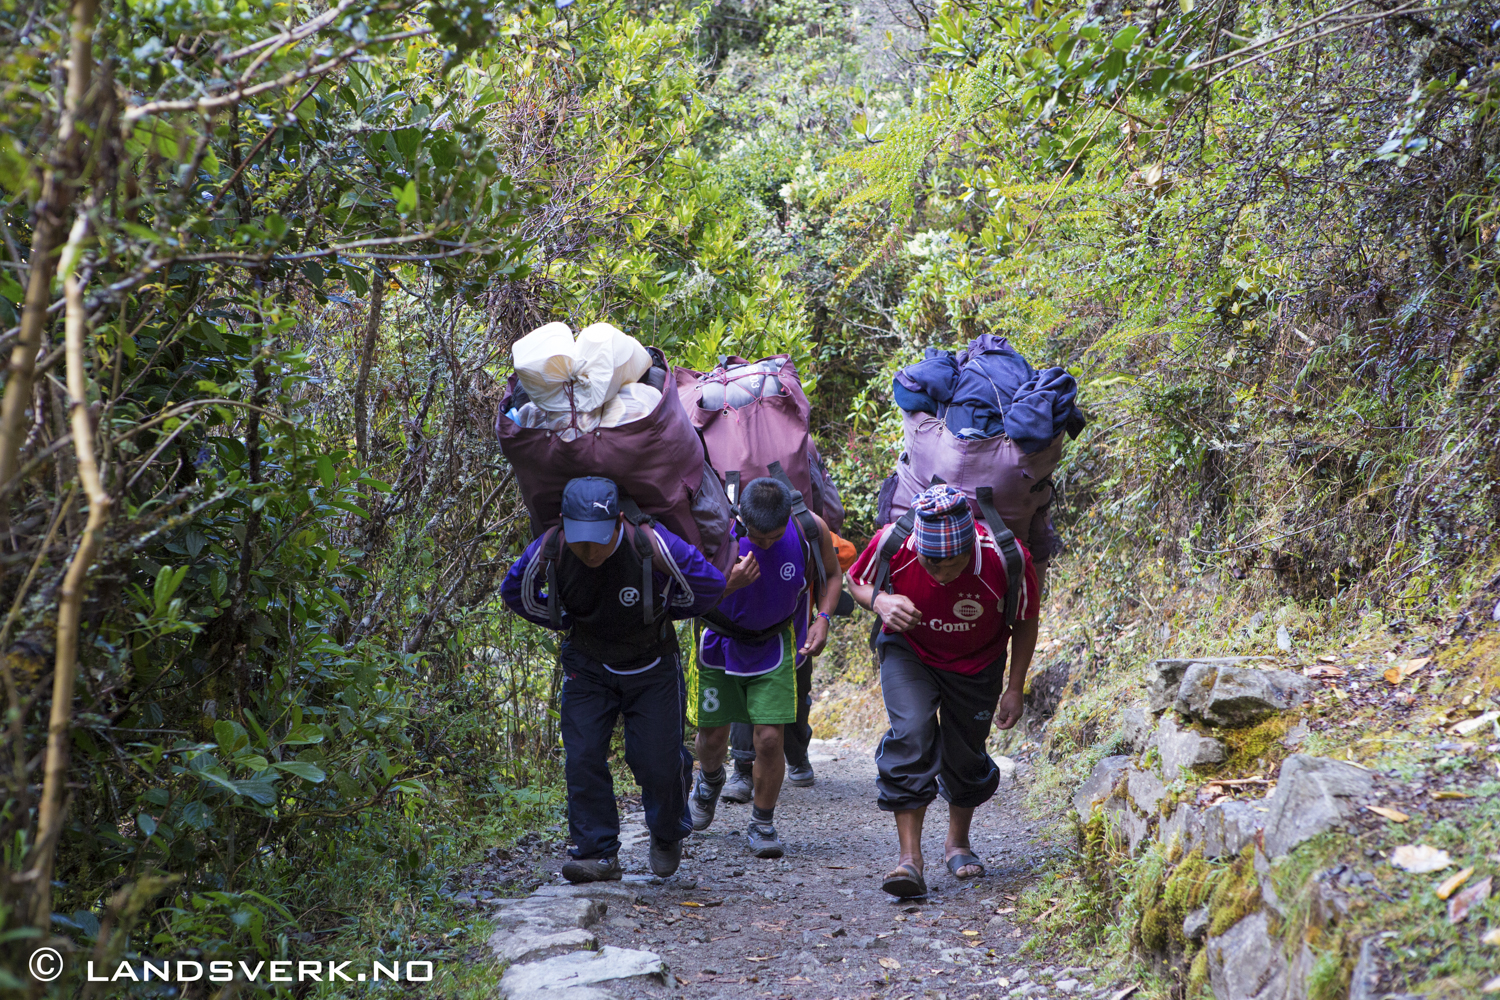 Crazy porters carrying way too much and running ahead to set up camp. The Inka Trail to Machu Picchu, Peru. 

(Canon EOS 5D Mark III / Canon EF 24-70mm 
f/2.8 L USM)